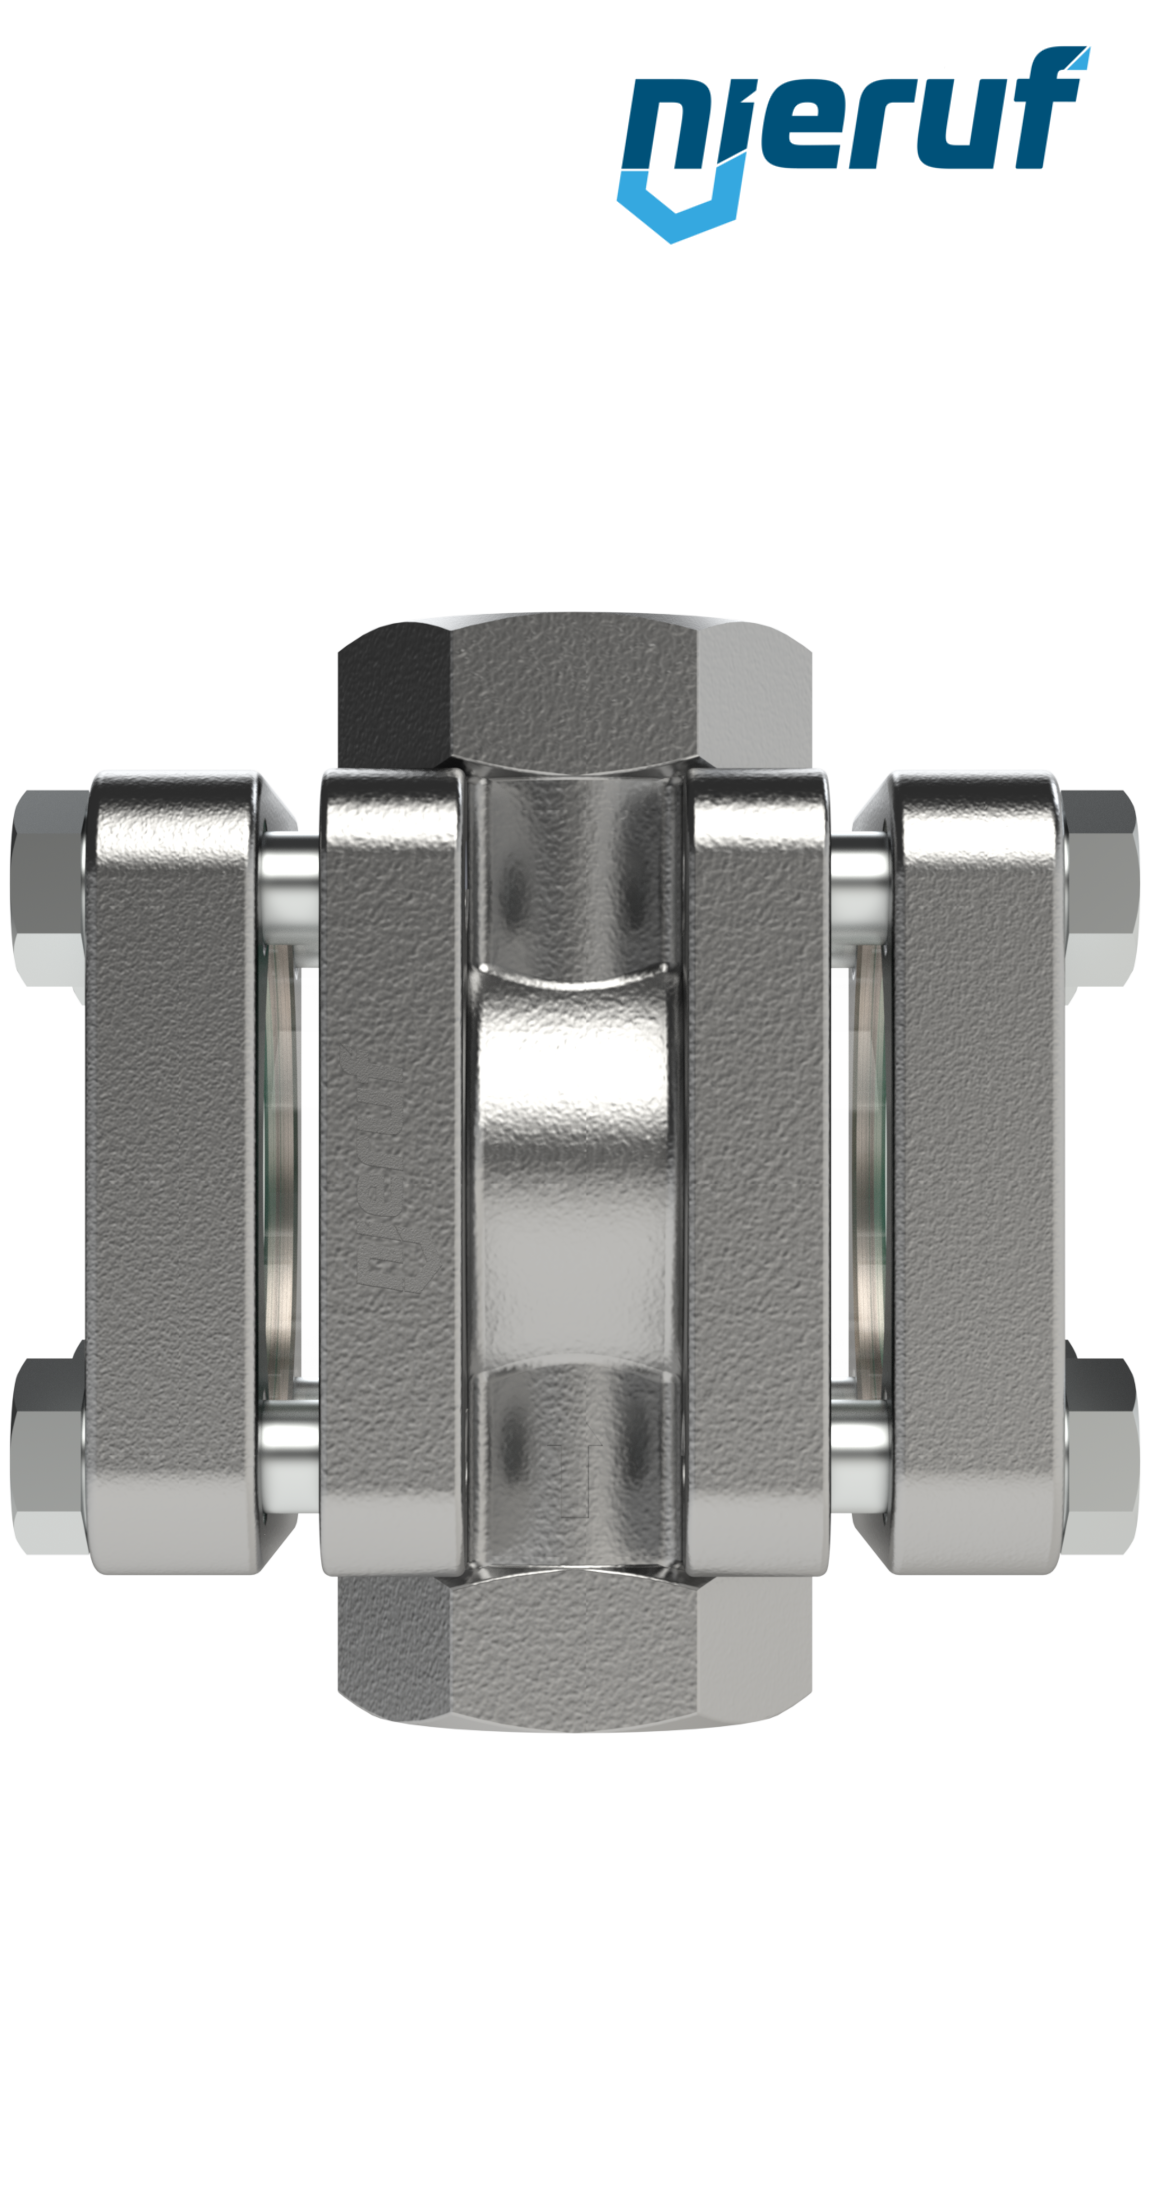 flow-through sight flow indicator DN40 - 1 1/2" Inch stainless steel borosilicate glass